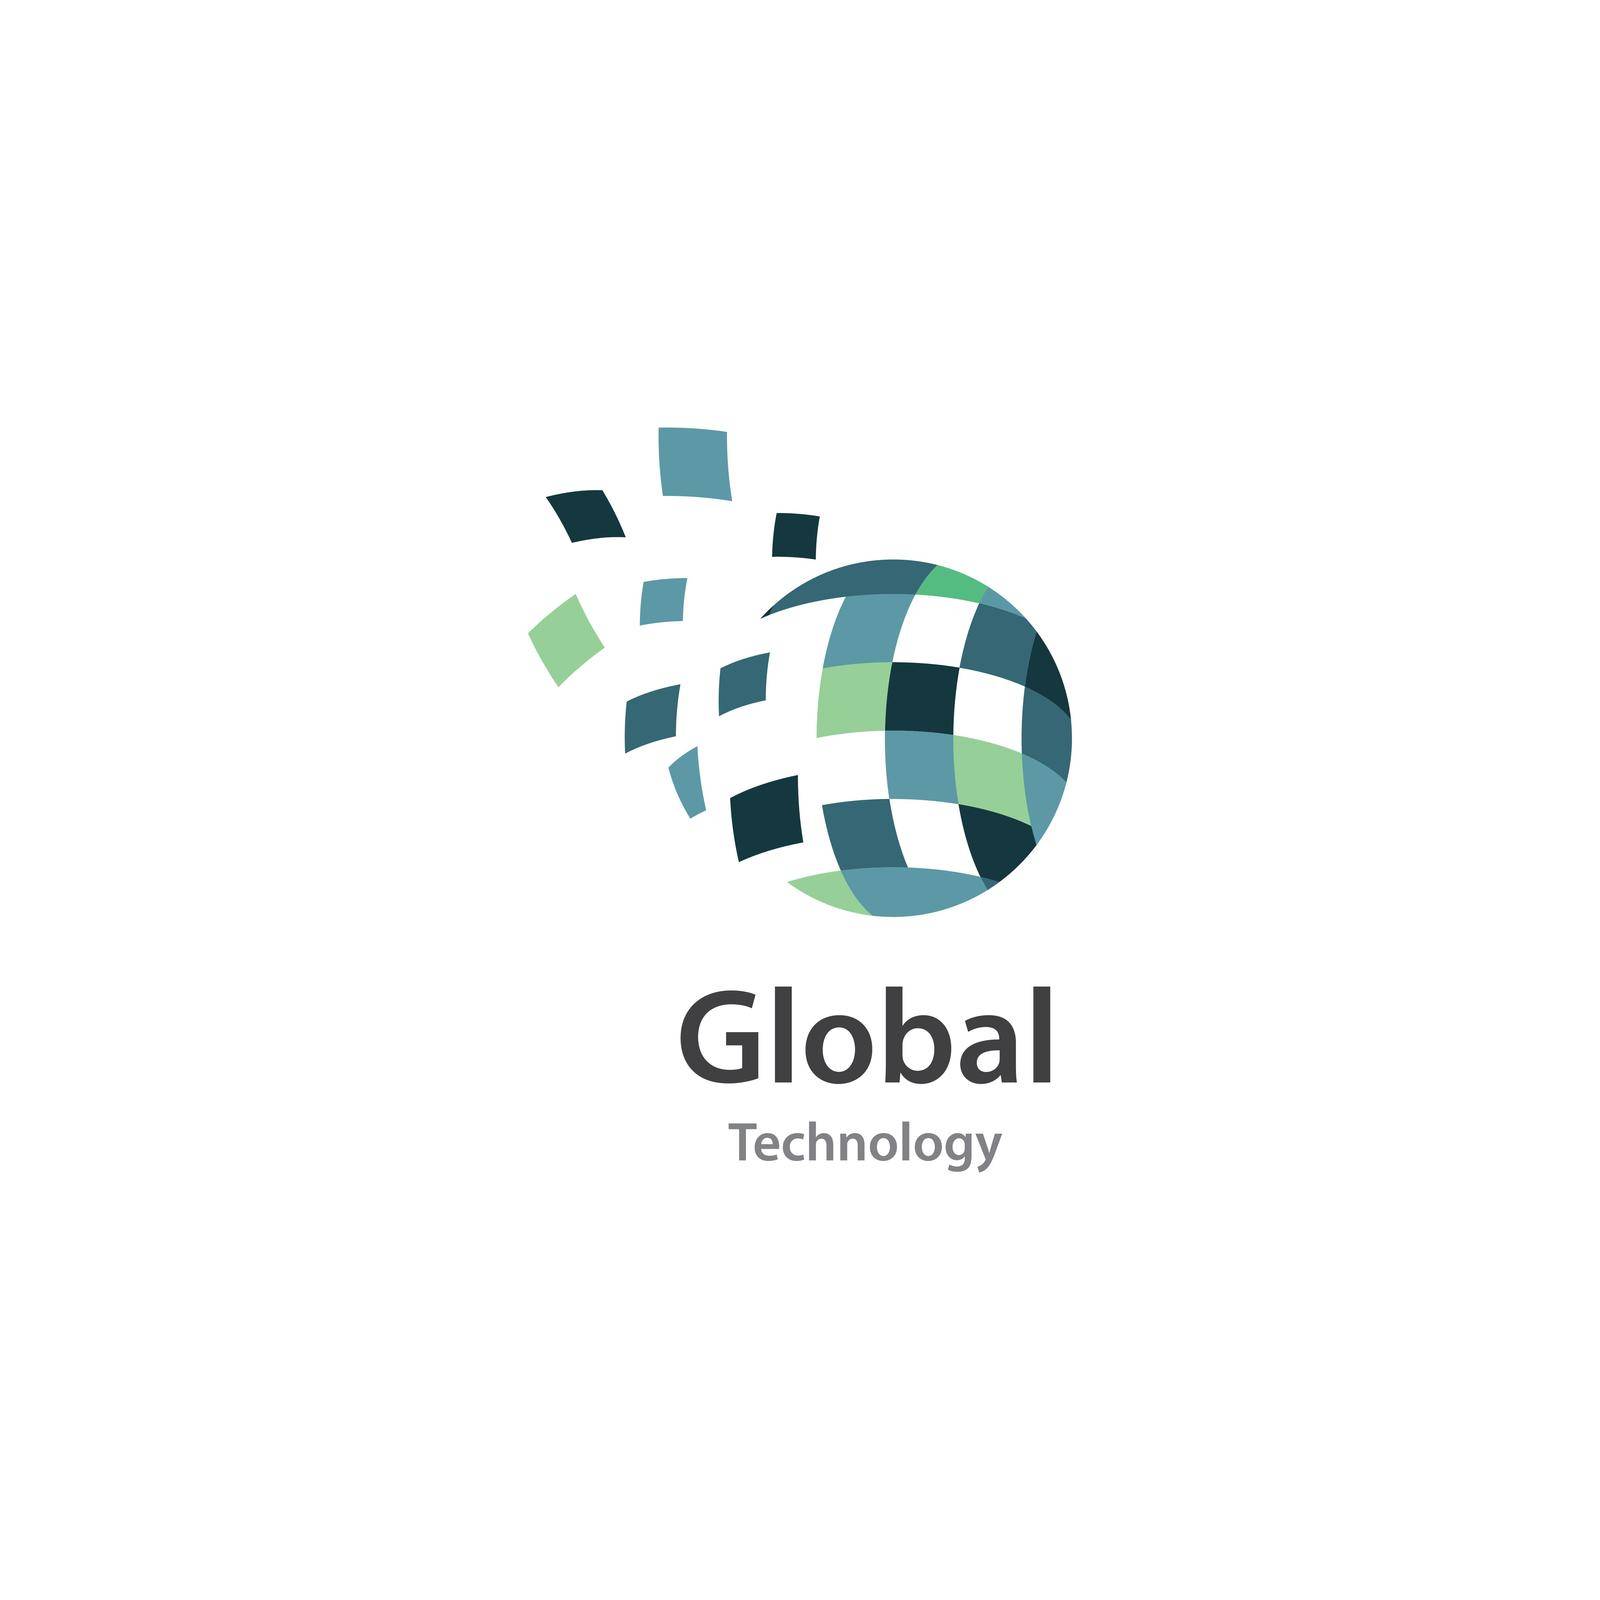 Global technology by awk